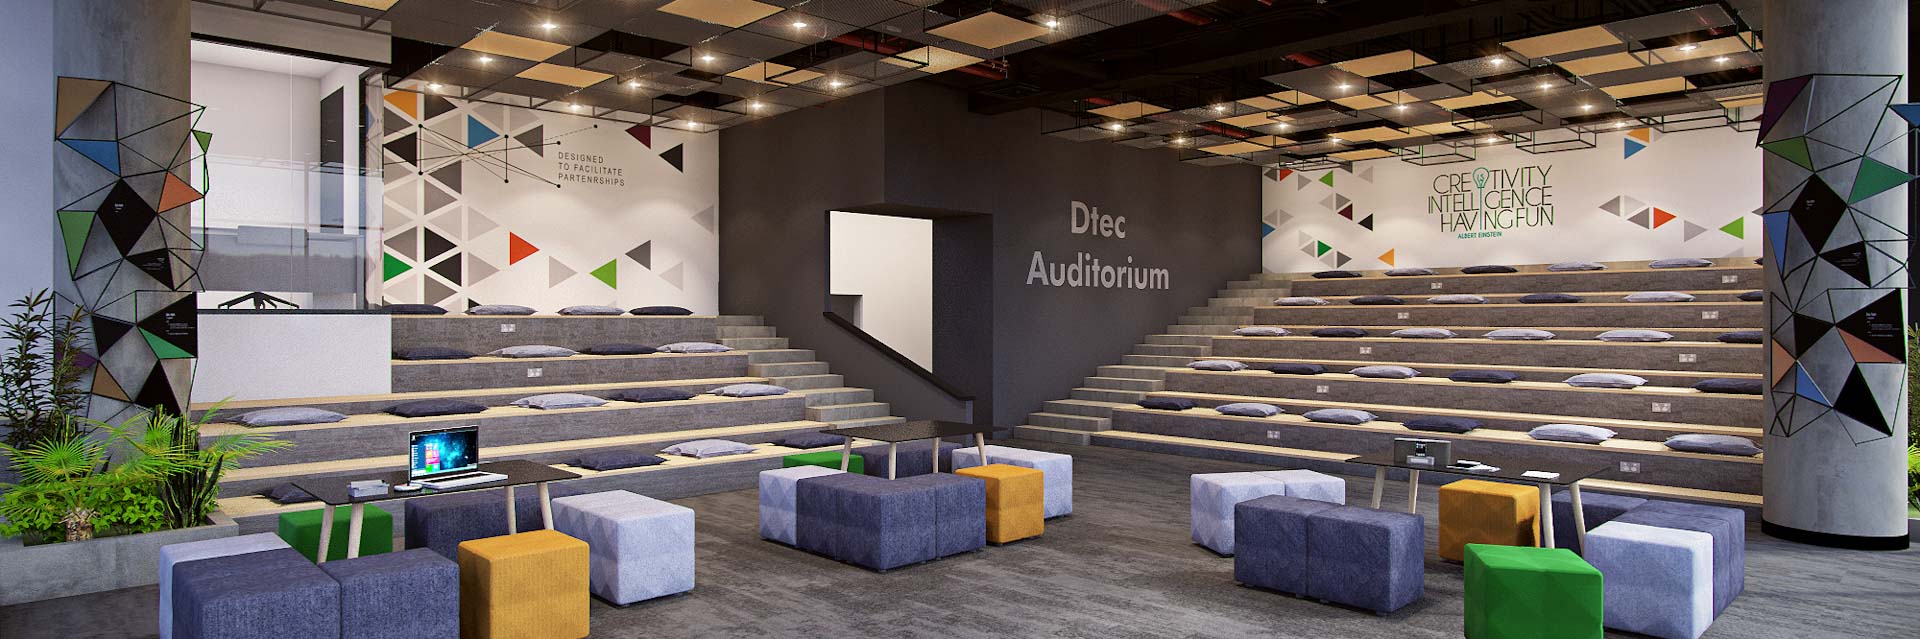 Book a Meeting room, dtec meeting rooms, dtec auditorium, startup events, startup community, events space, events booking